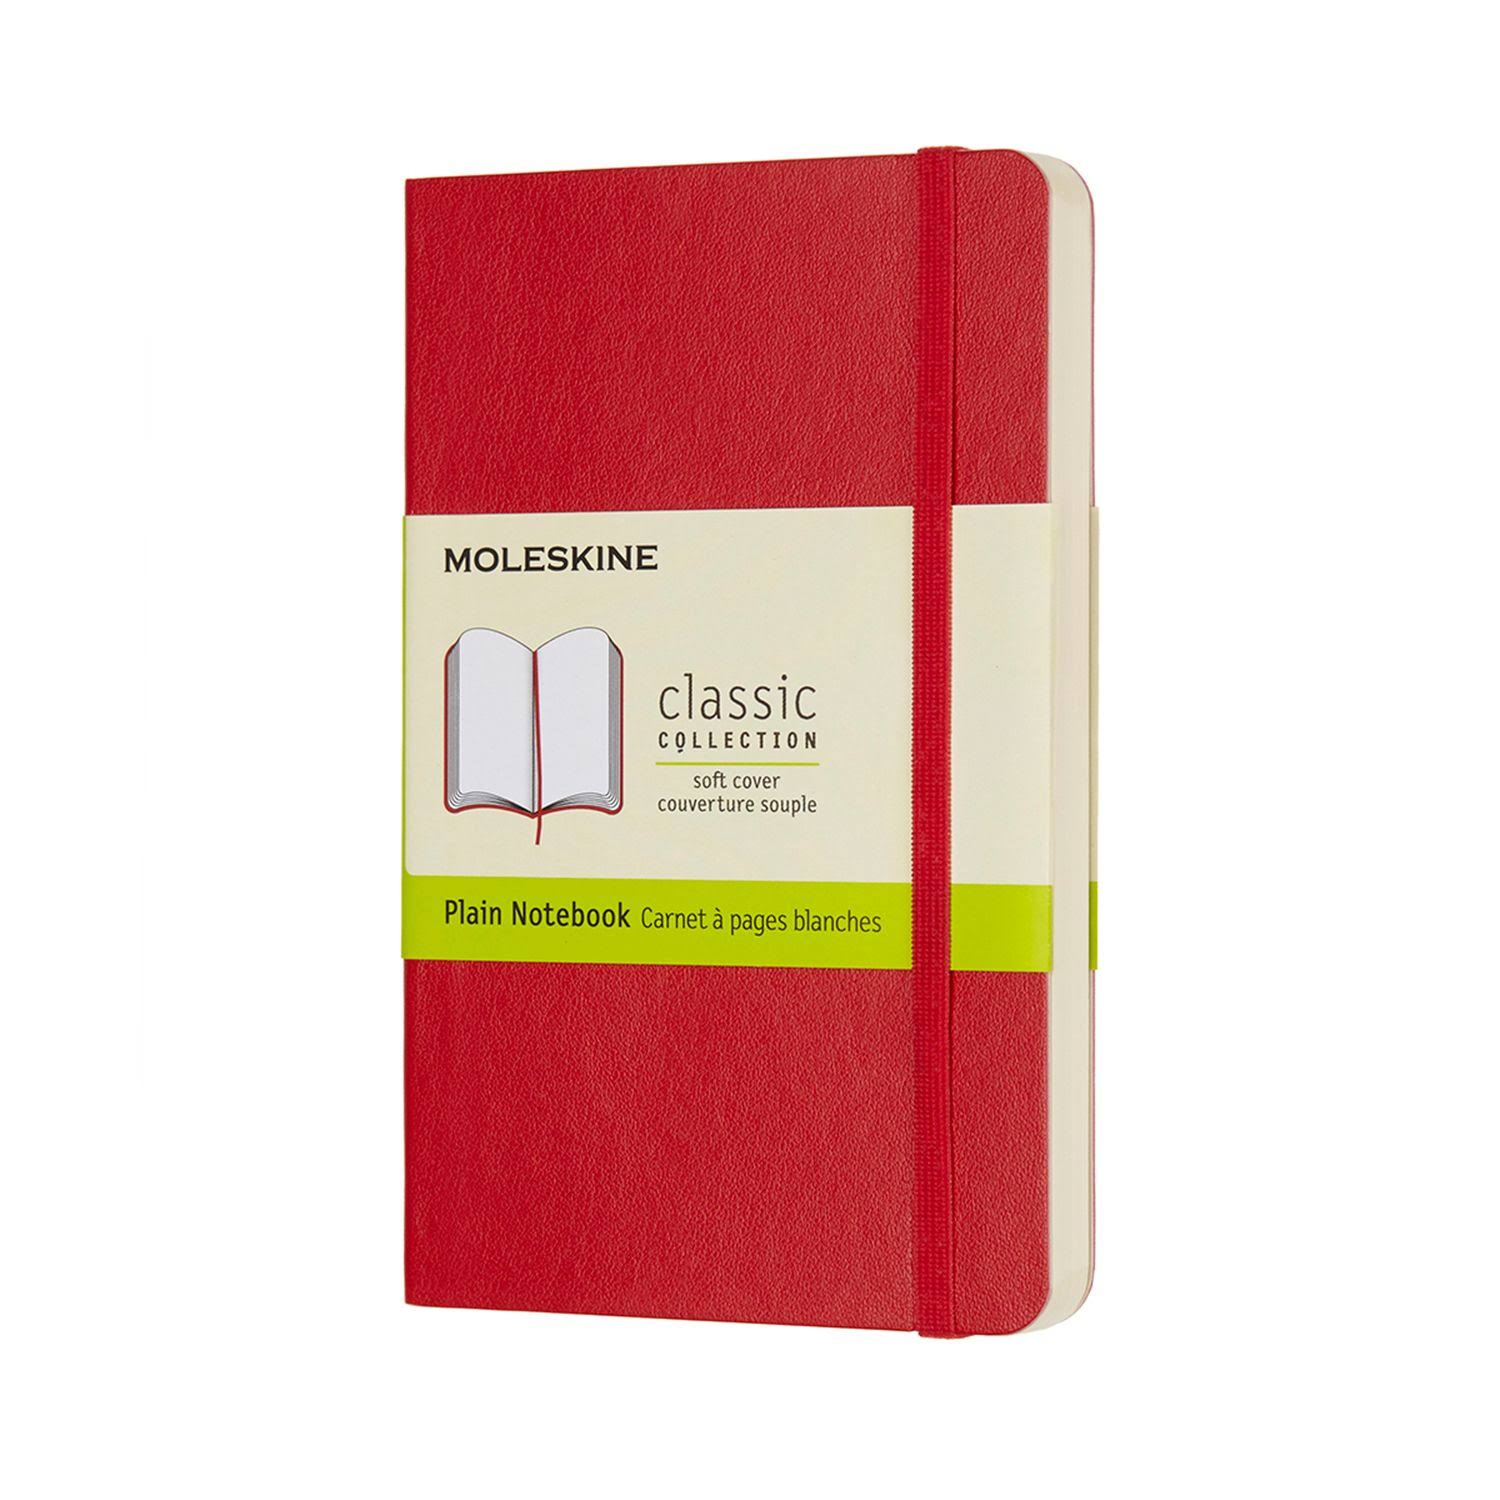 Moleskine Classic Pocket Notebook - Plain, Scarlet Red, Soft Cover, 3.5" X 5.5"